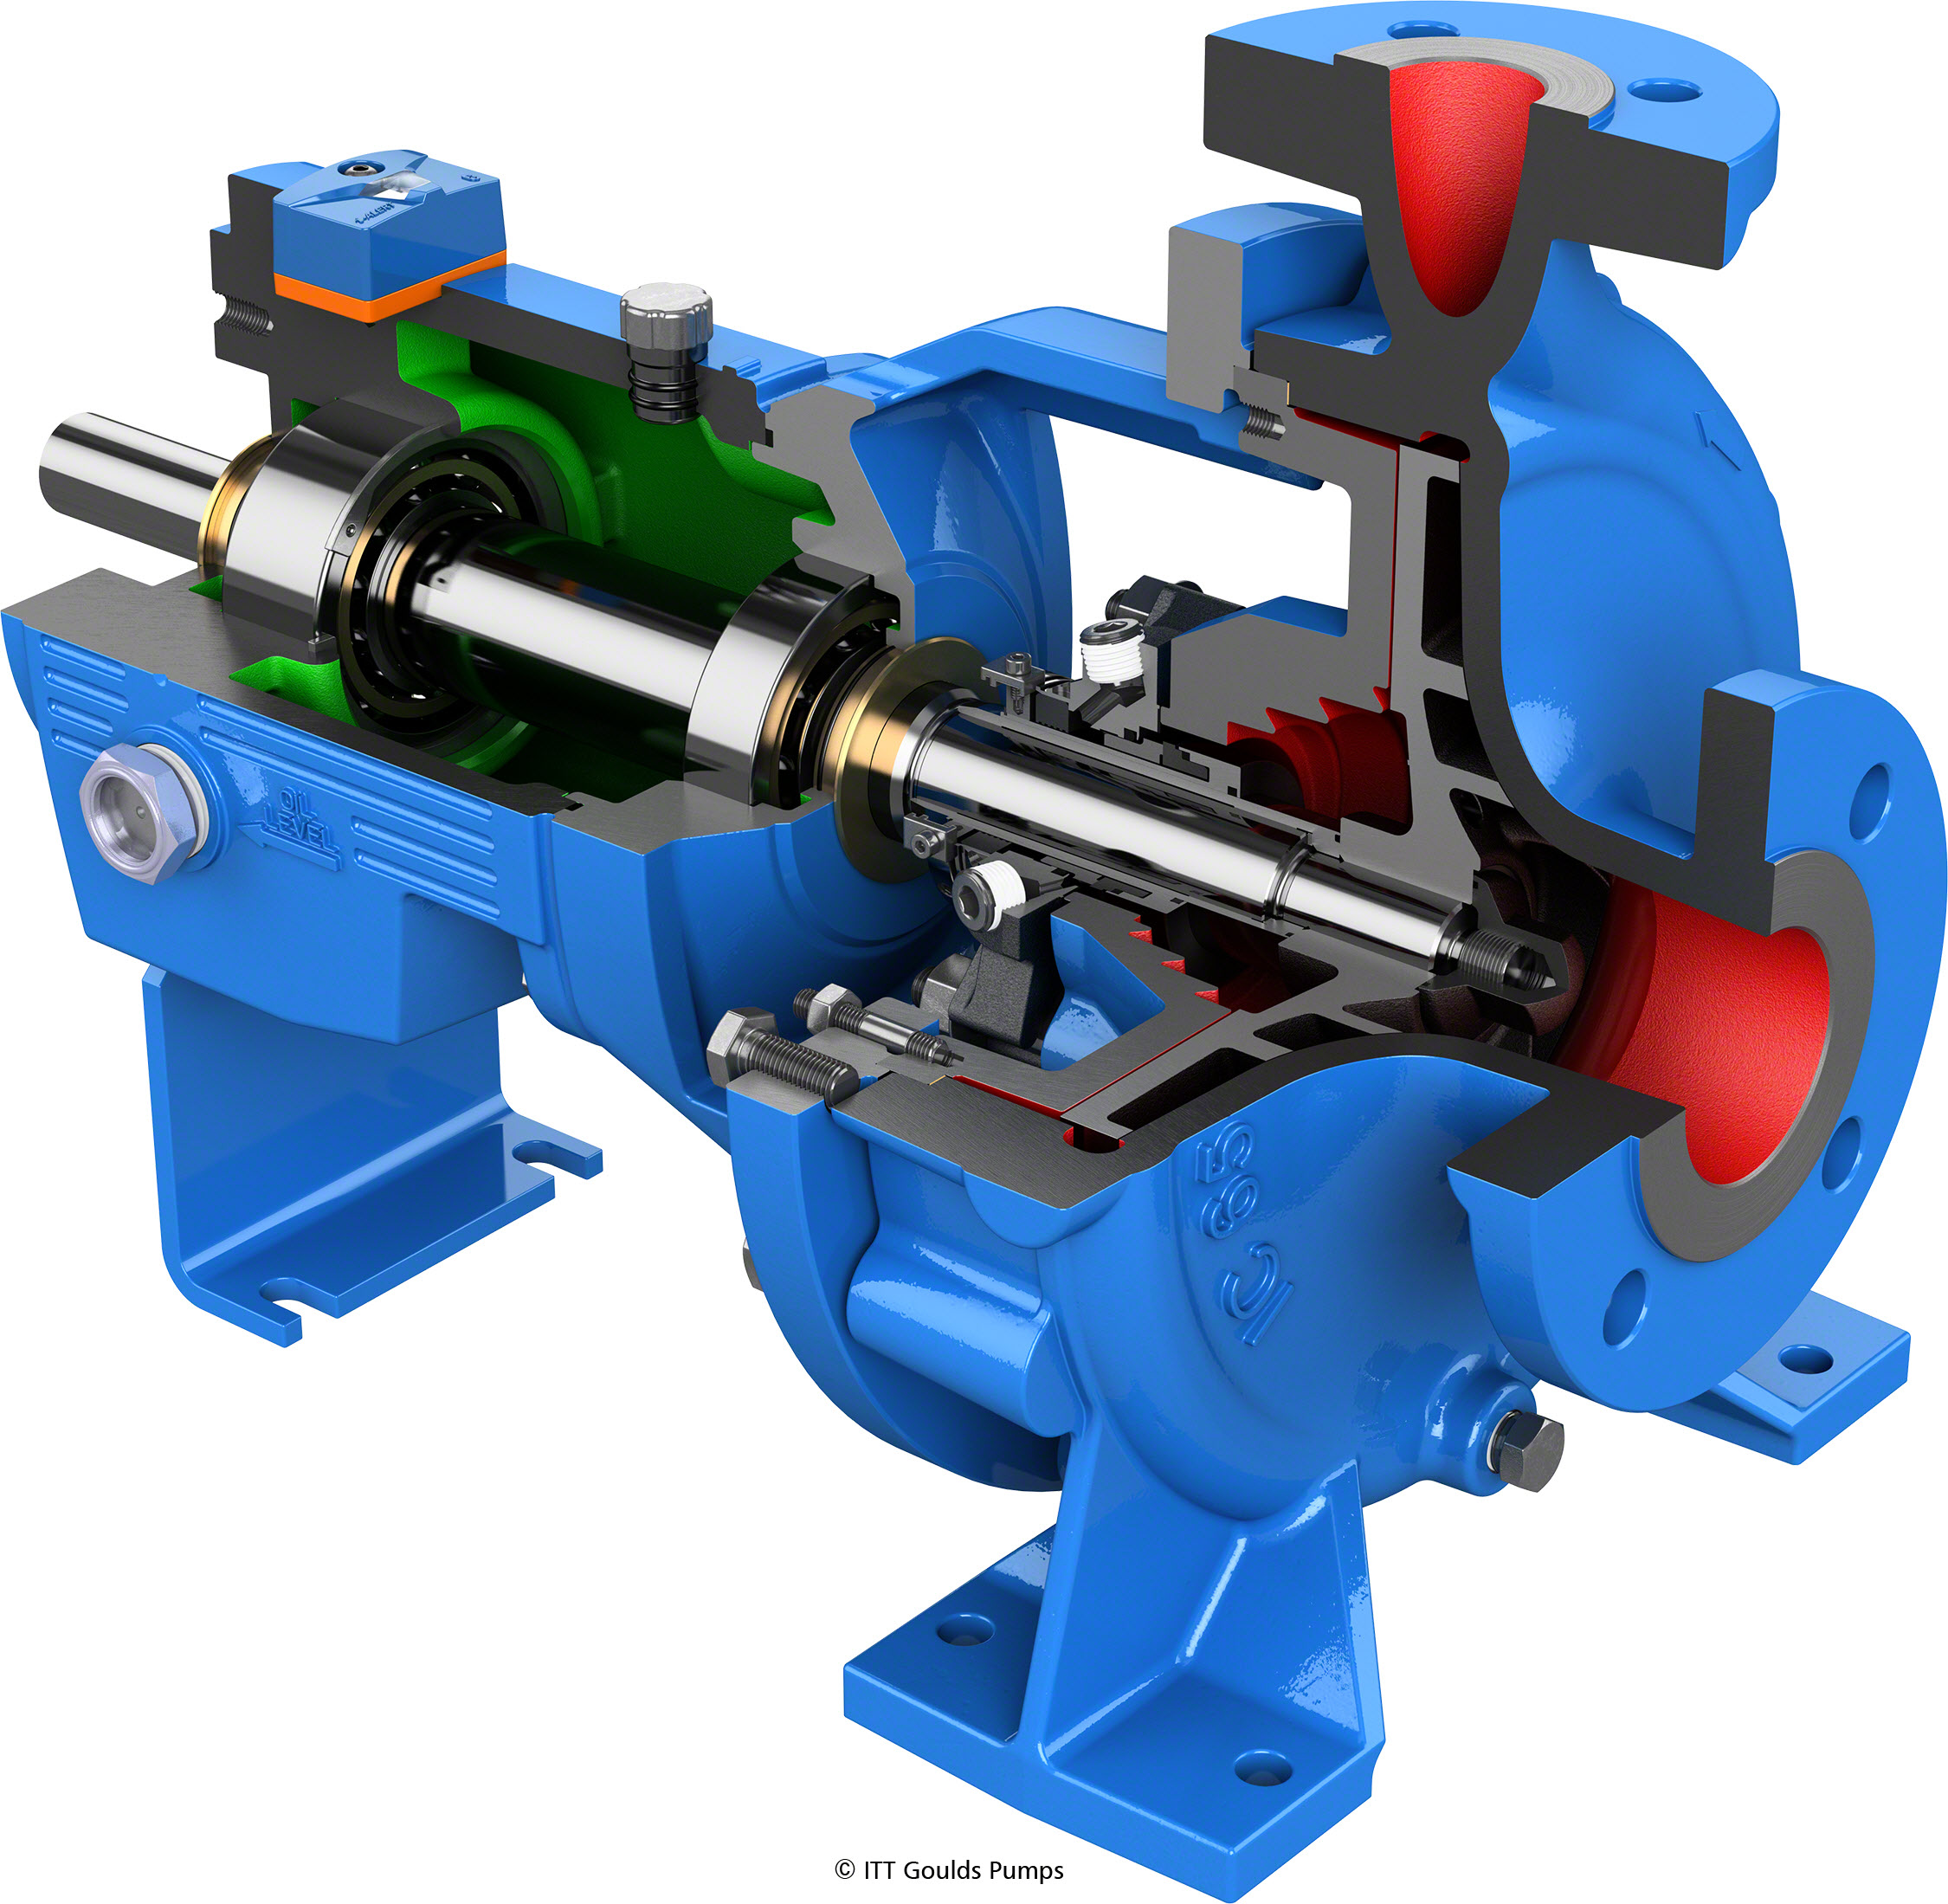 The ICO augments the standard IC pump design with an open impeller for handling solids.